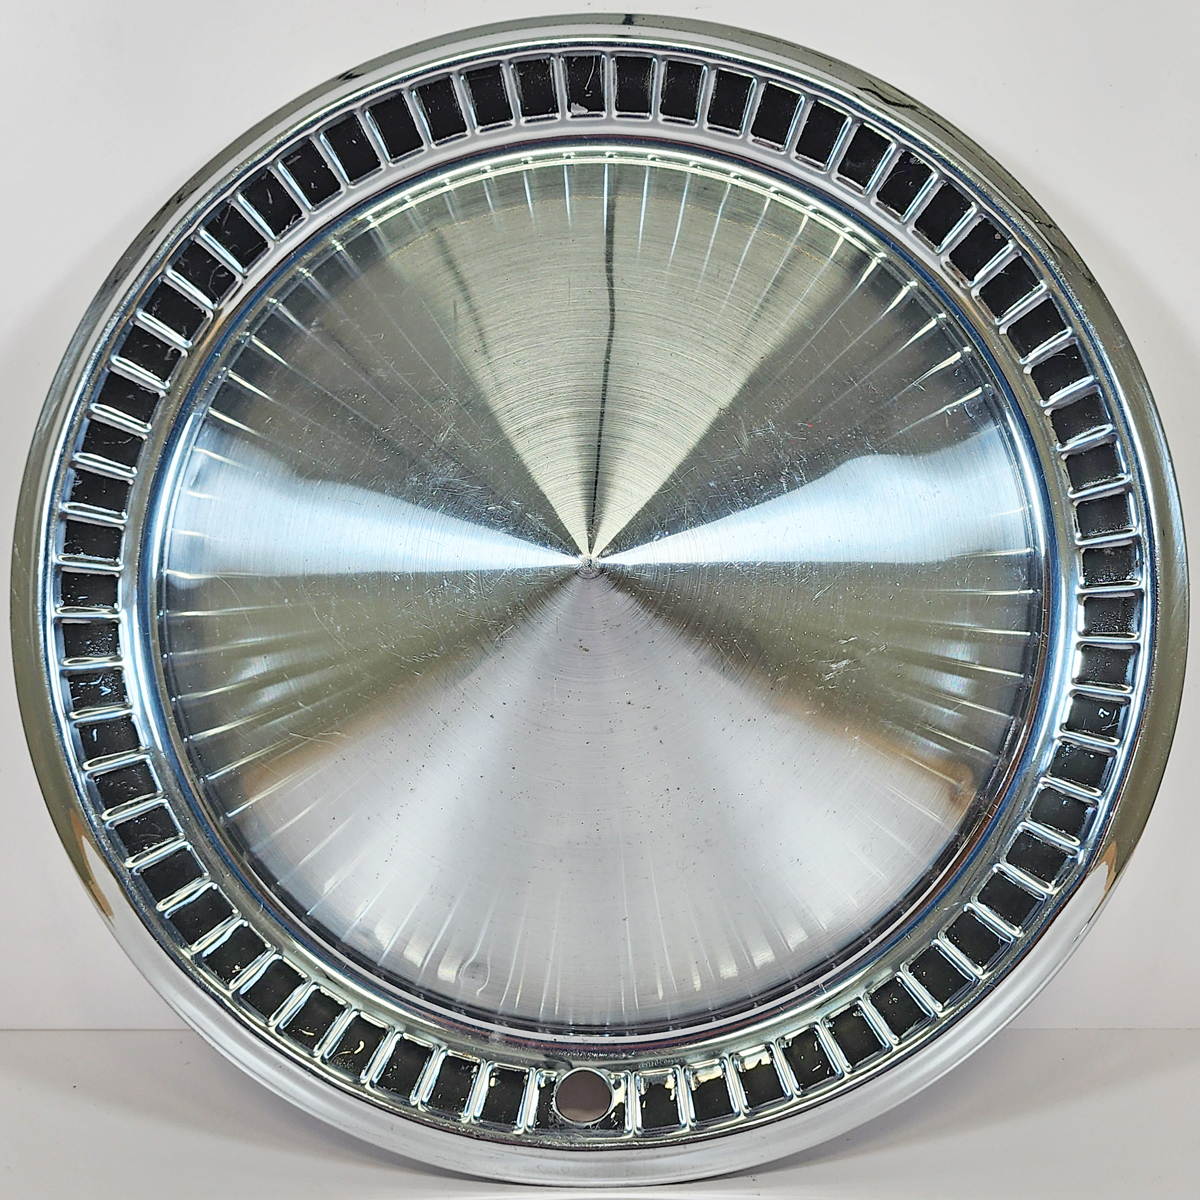 Primary image for ONE 1957 Plymouth Belvedere 14" Chrome Hubcap / Wheel Cover # 1730797 USED